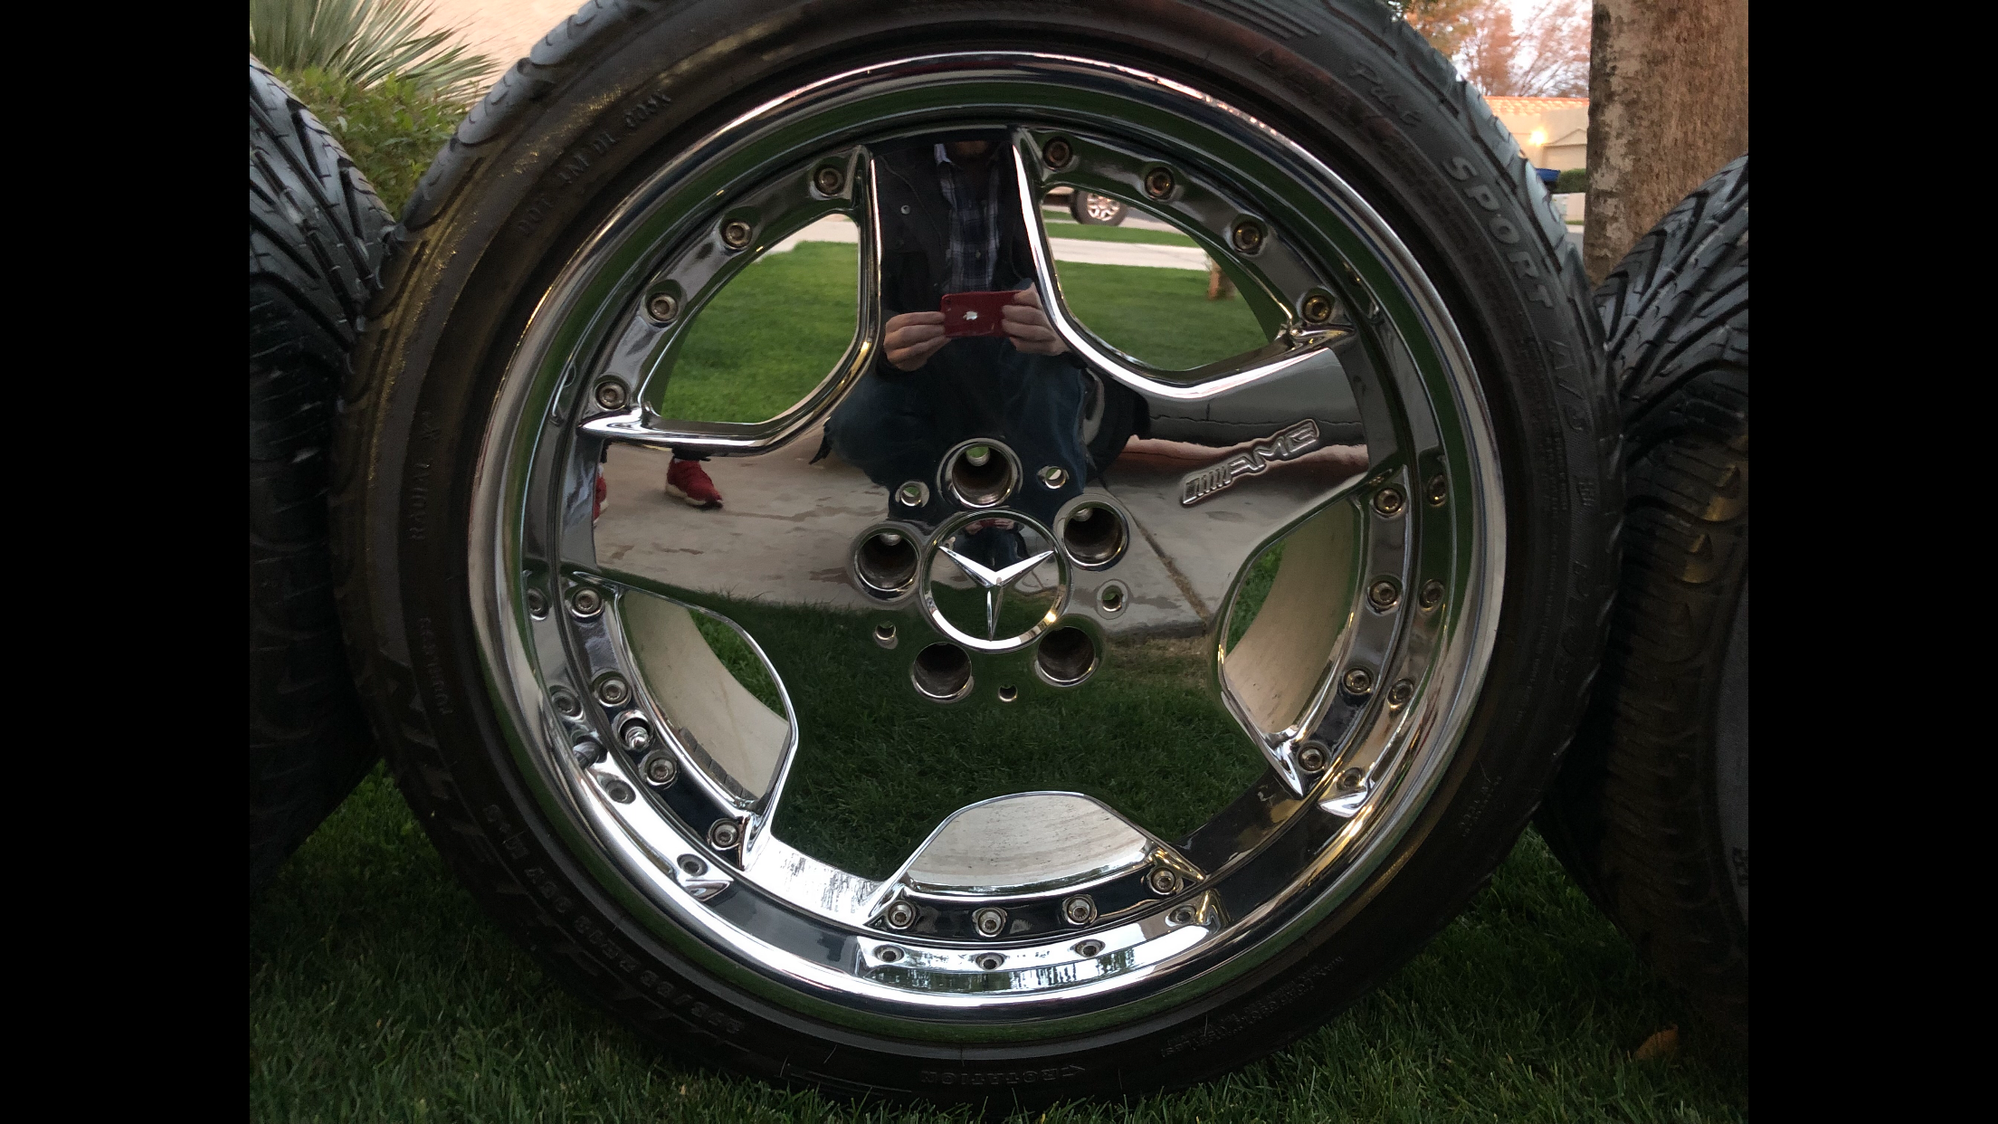 Wheels and Tires/Axles - Rare authentic bbs amg 2 piece staggered chrome monoblock wheels. - Used - Phoenix, AZ 85233, United States